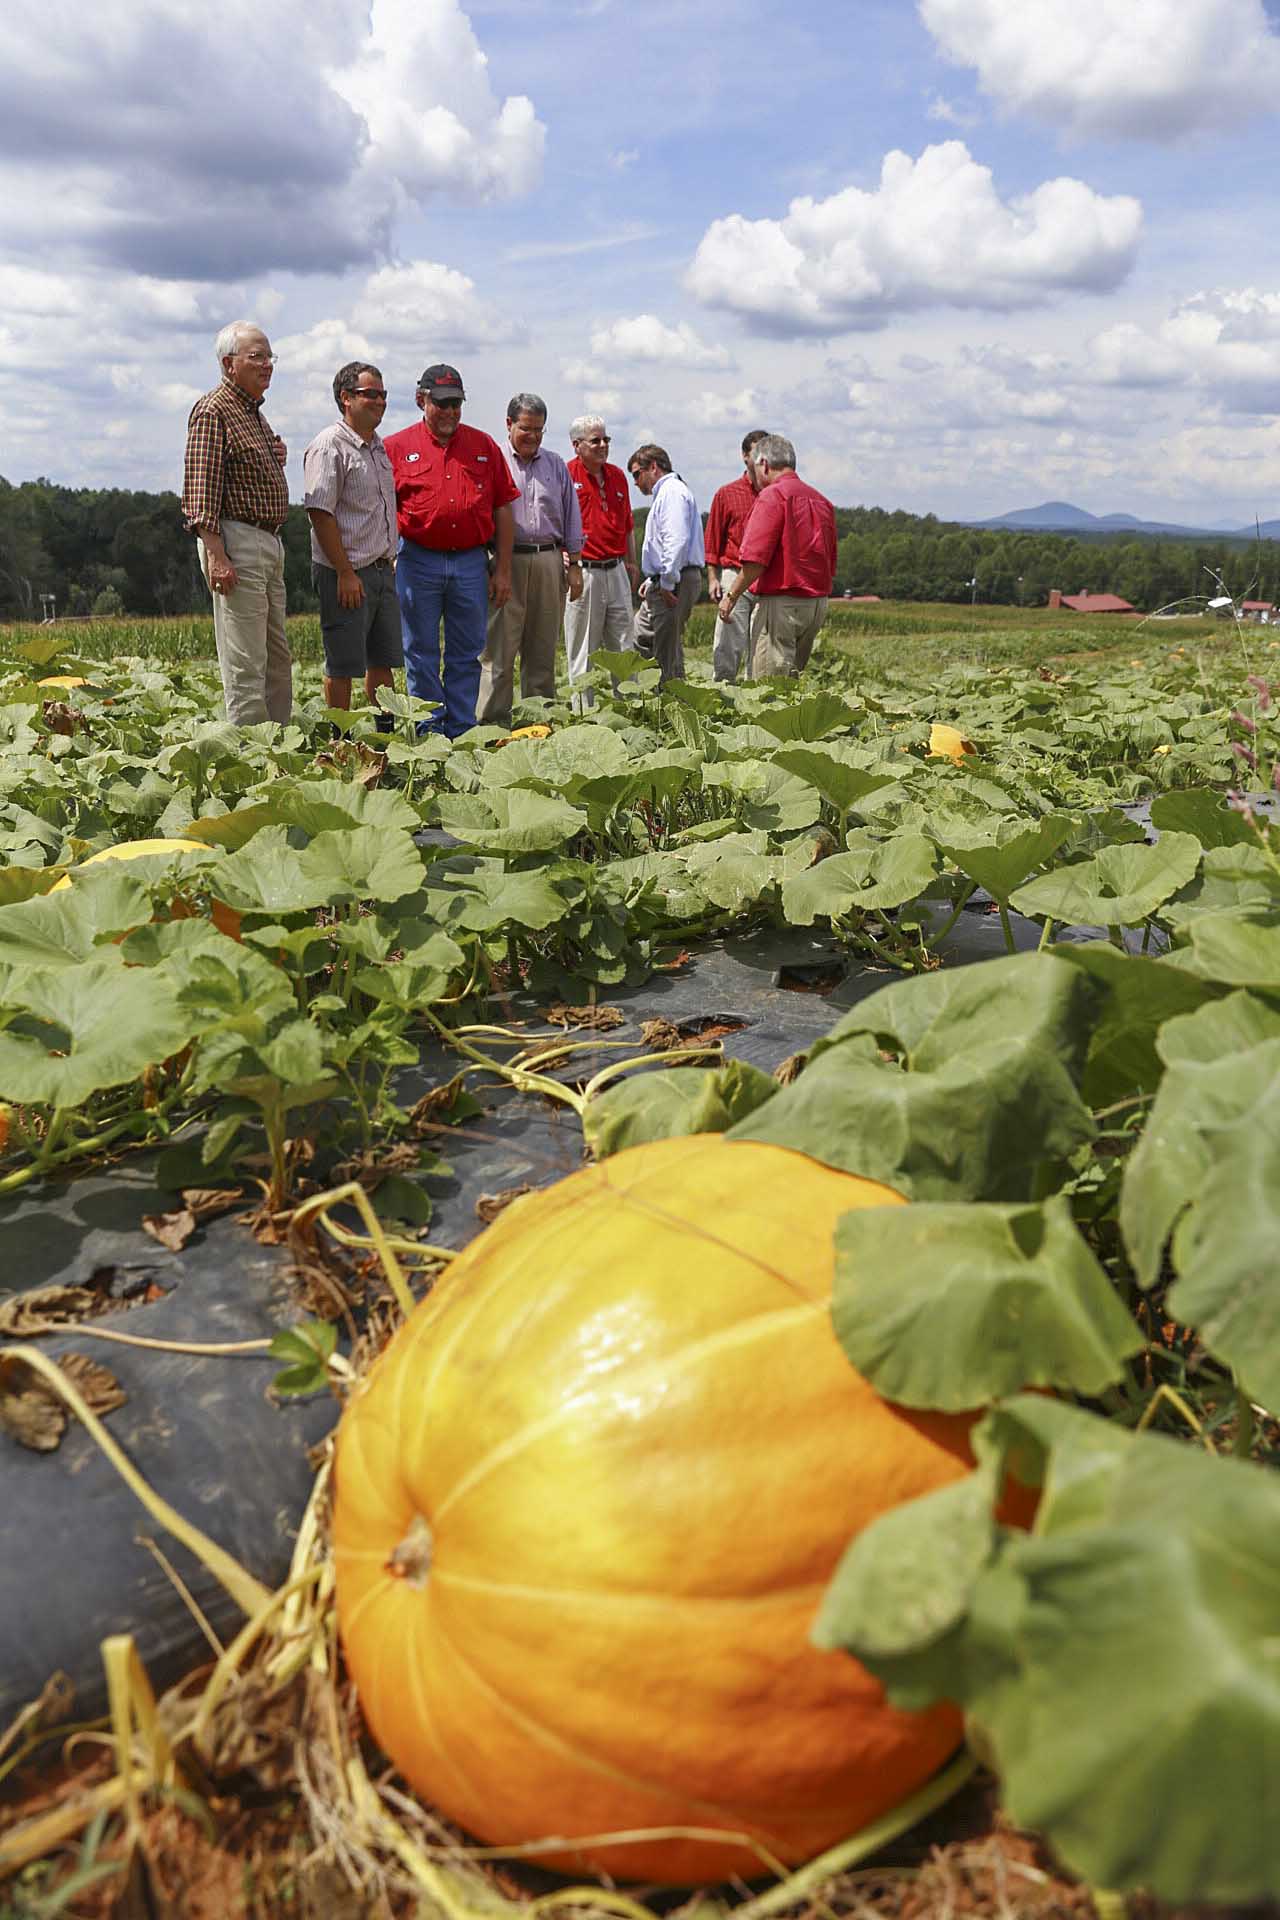 Georgia Commissioner of Agriculture Gary Black examines a pumpkin field at Jaemor Farms with farm manager Drew Echols, Rep. Terry England, UGA President Jere Morehead, CAES Dean J. Scott Angle and other officials during the UGA President's Third Annual Farm Tour.